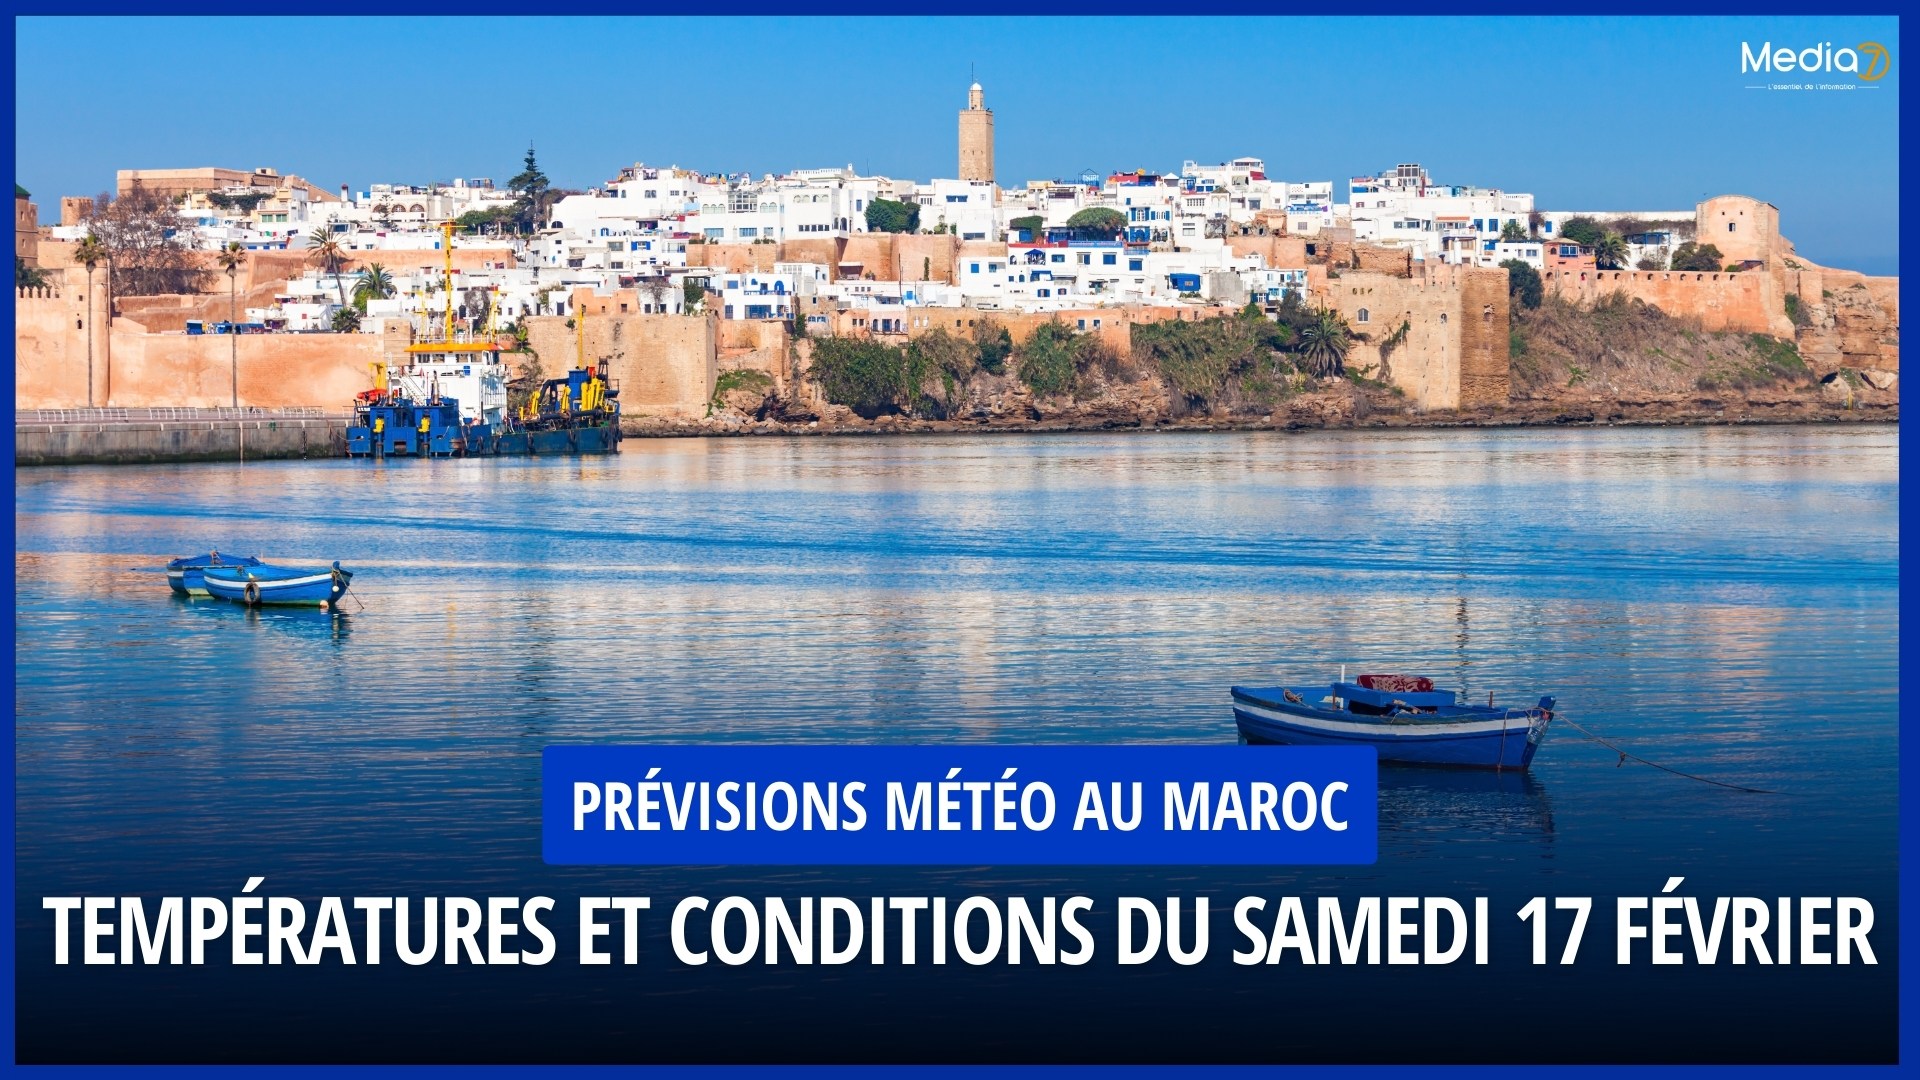 Weather Forecast: Temperatures and Conditions for Saturday February 17 in Morocco